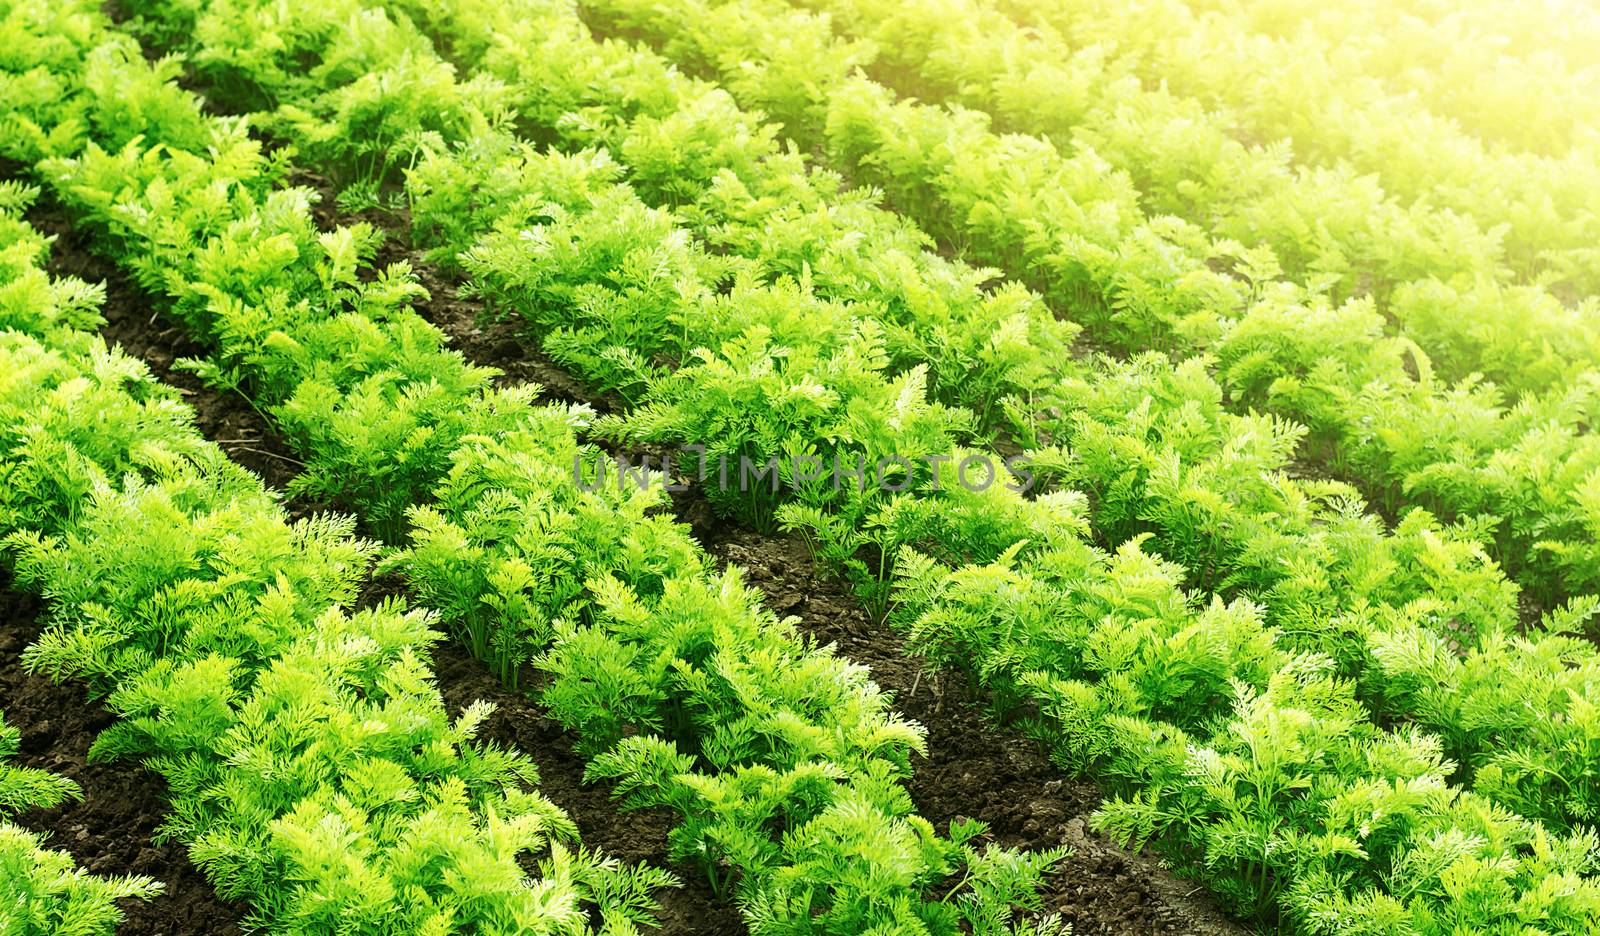 Farm agricultural field of carrots plantation. Agroindustry and agribusiness. Agriculture, growing organic food vegetables. Cultivation and care, harvesting. Ecological agriculture. Farmland